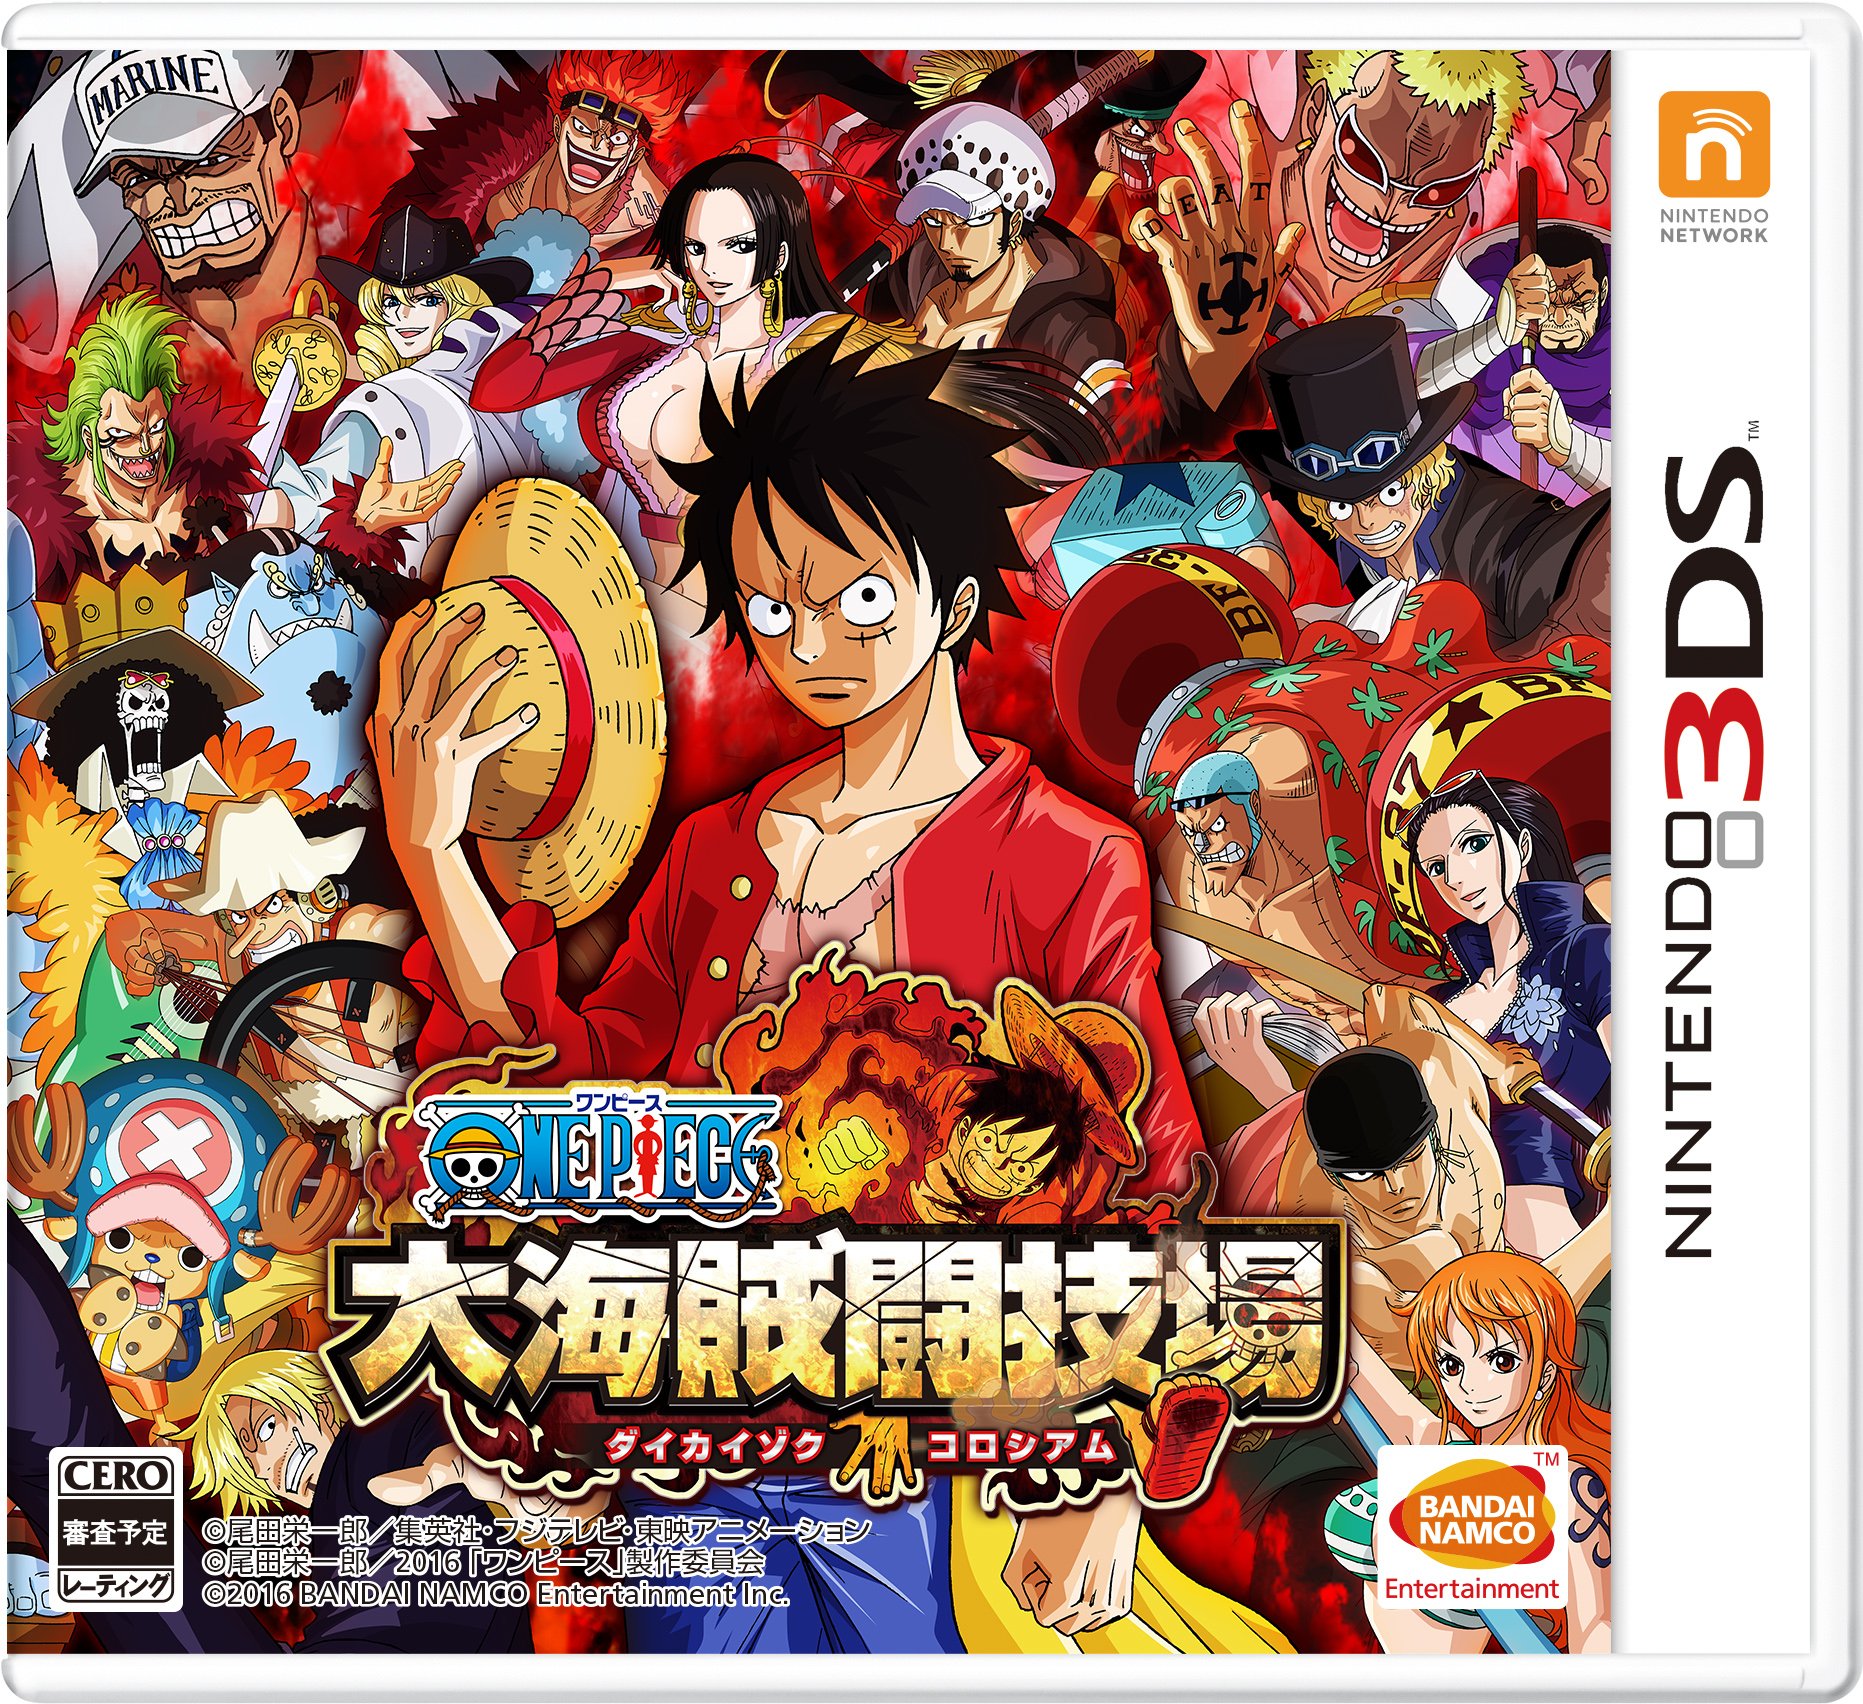 One-piece-great-pirate-colosseum_image 5